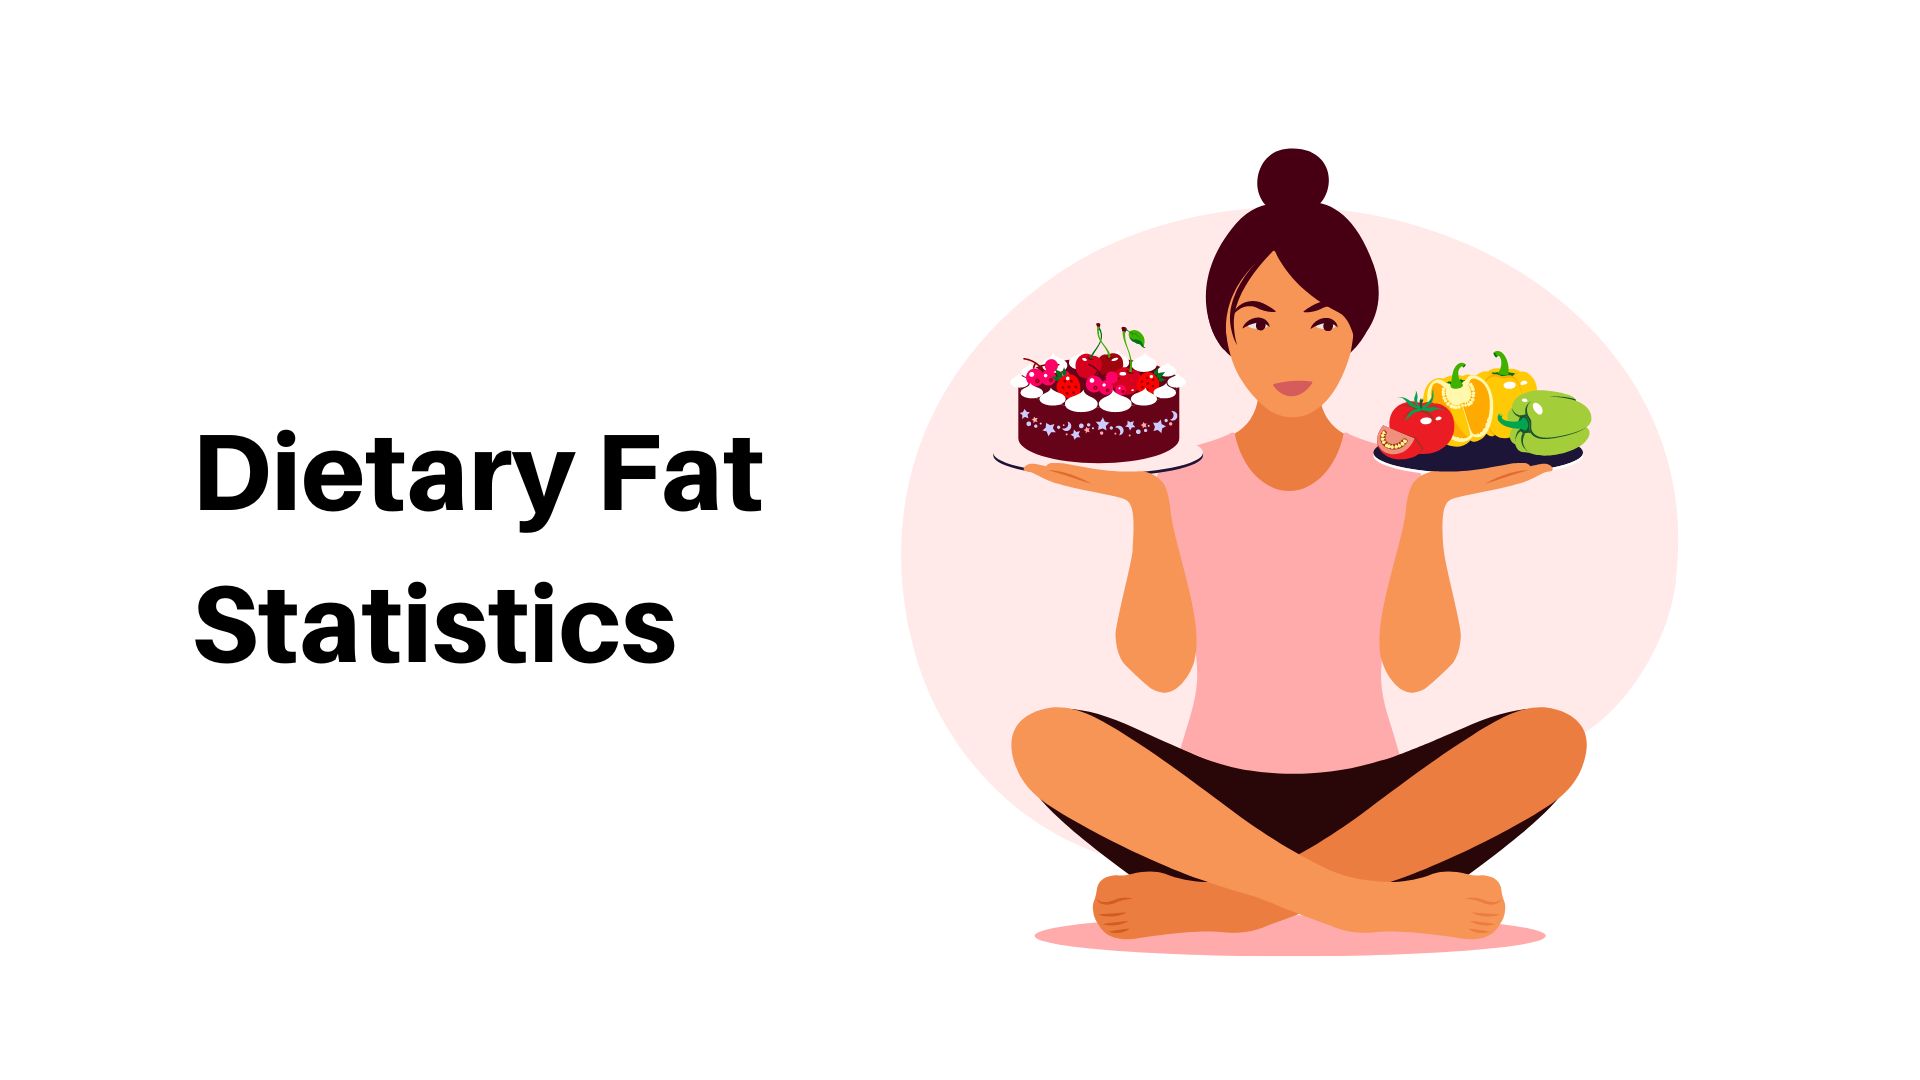 Dietary Fat Statistics By Country, Gender and Age